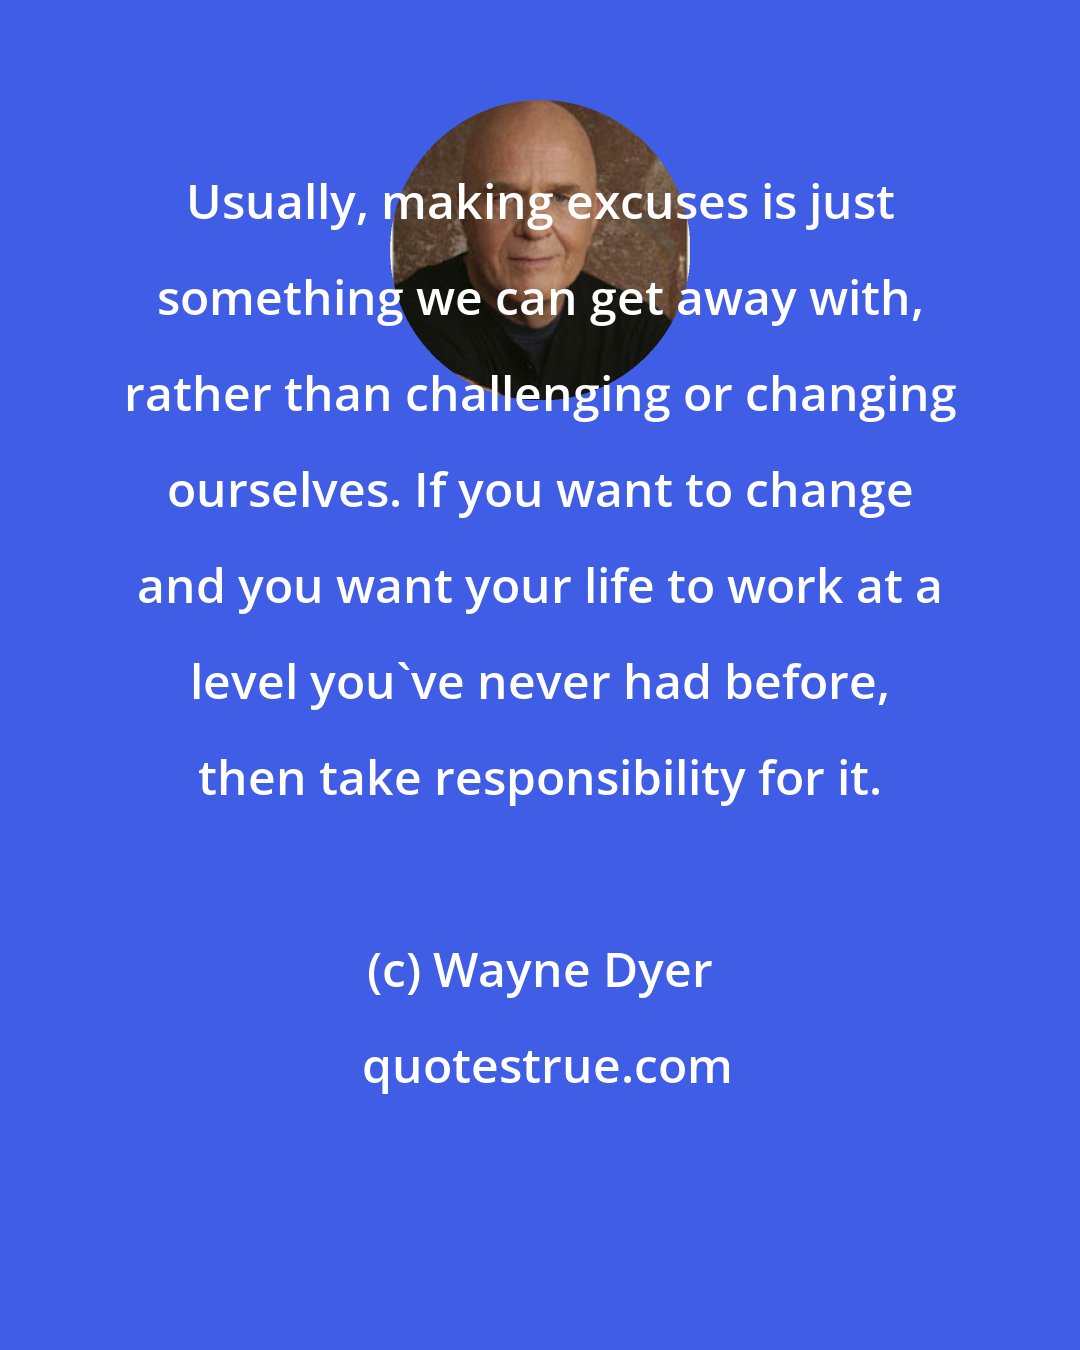 Wayne Dyer: Usually, making excuses is just something we can get away with, rather than challenging or changing ourselves. If you want to change and you want your life to work at a level you've never had before, then take responsibility for it.